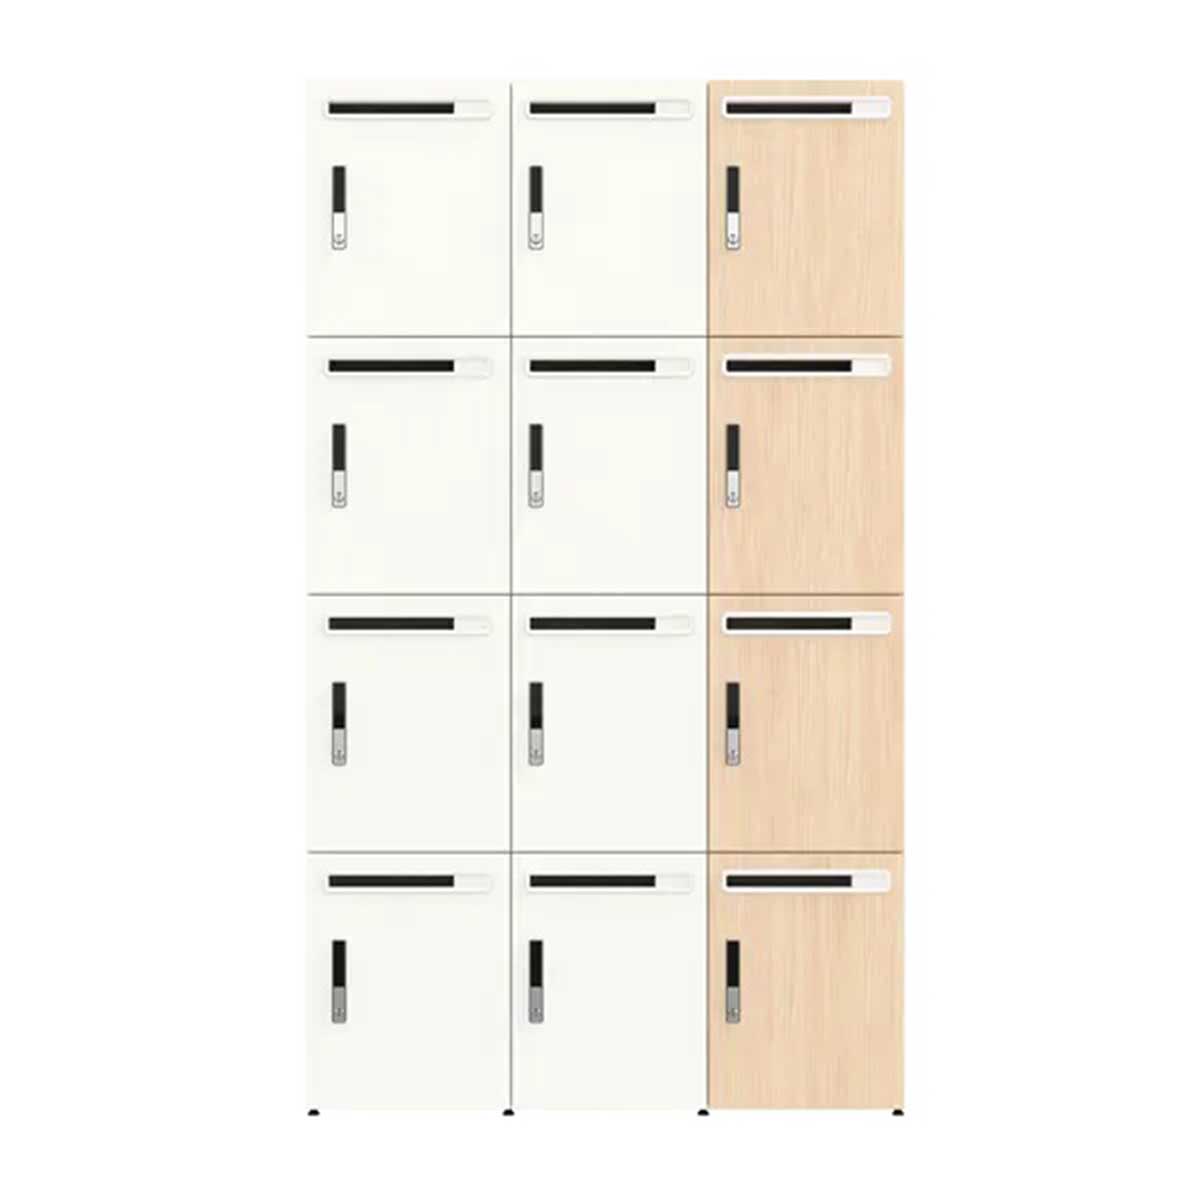 Electronics Locker Safe Manufacturers, Suppliers in Noida Sector 49